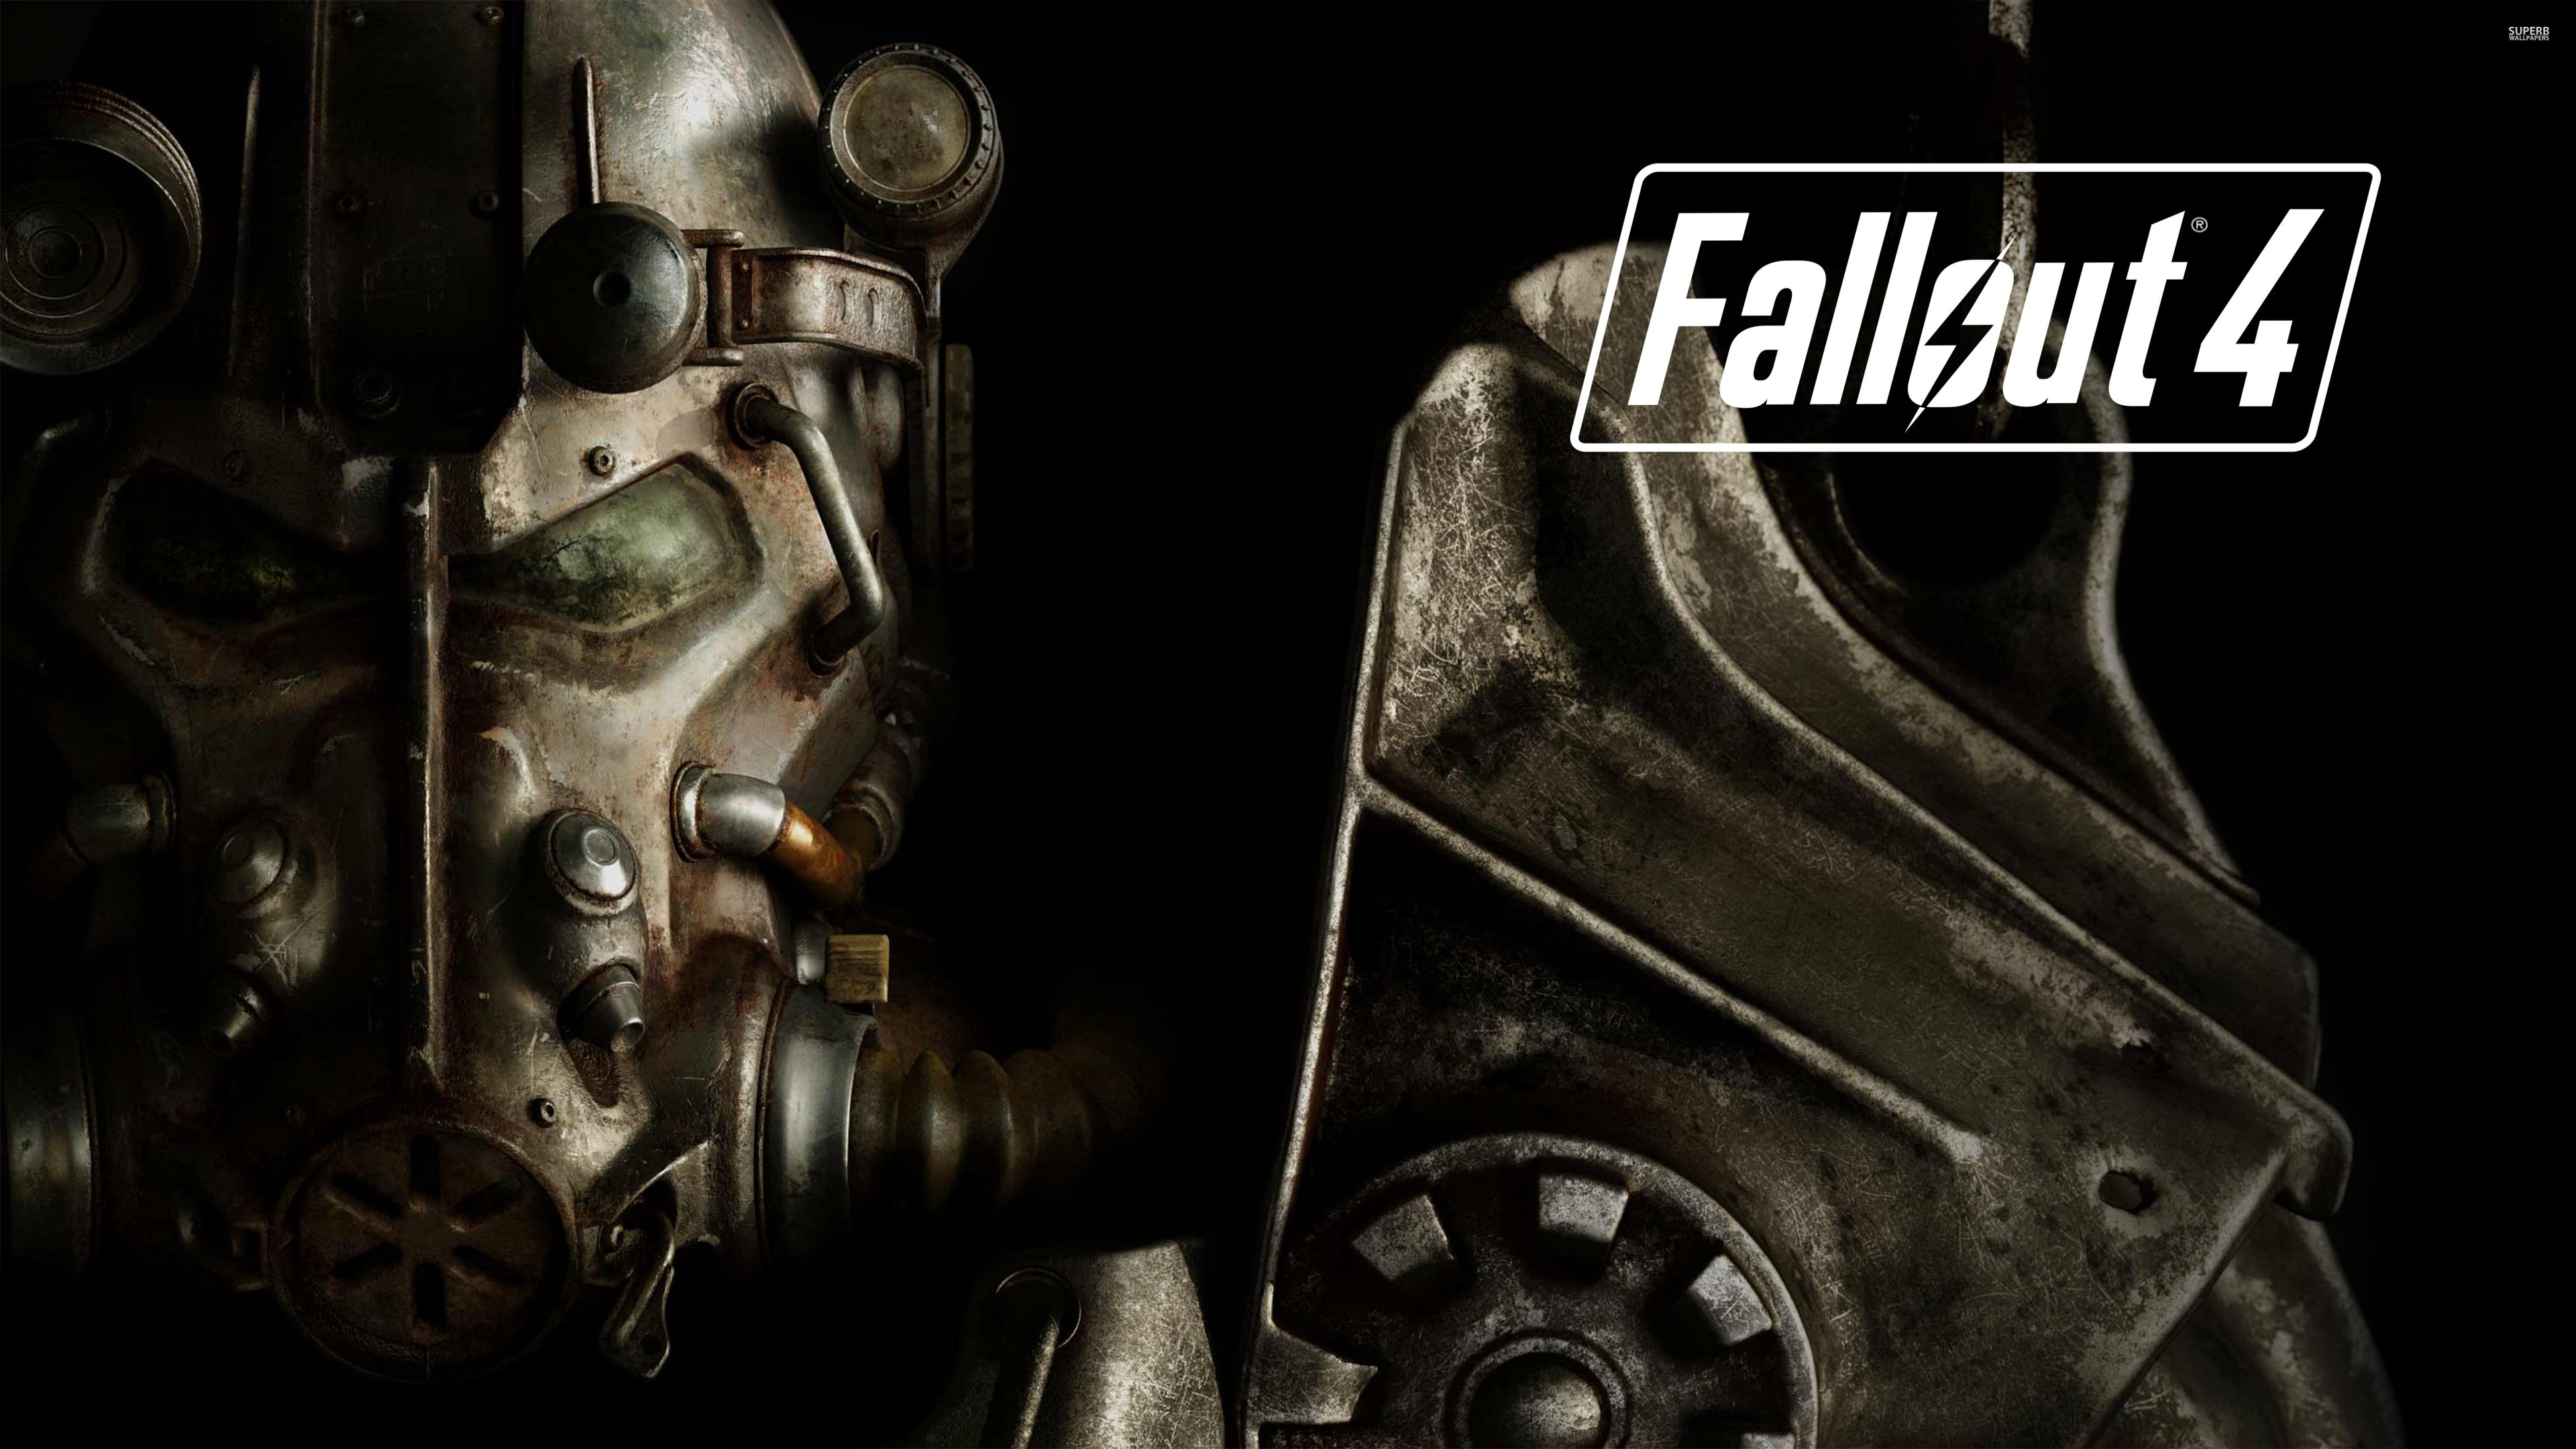 fallout, Sci fi, Warrior, Action, Fighting, Shooter, Sci fi, Futuristic, Apocalyptic, Poster Wallpaper